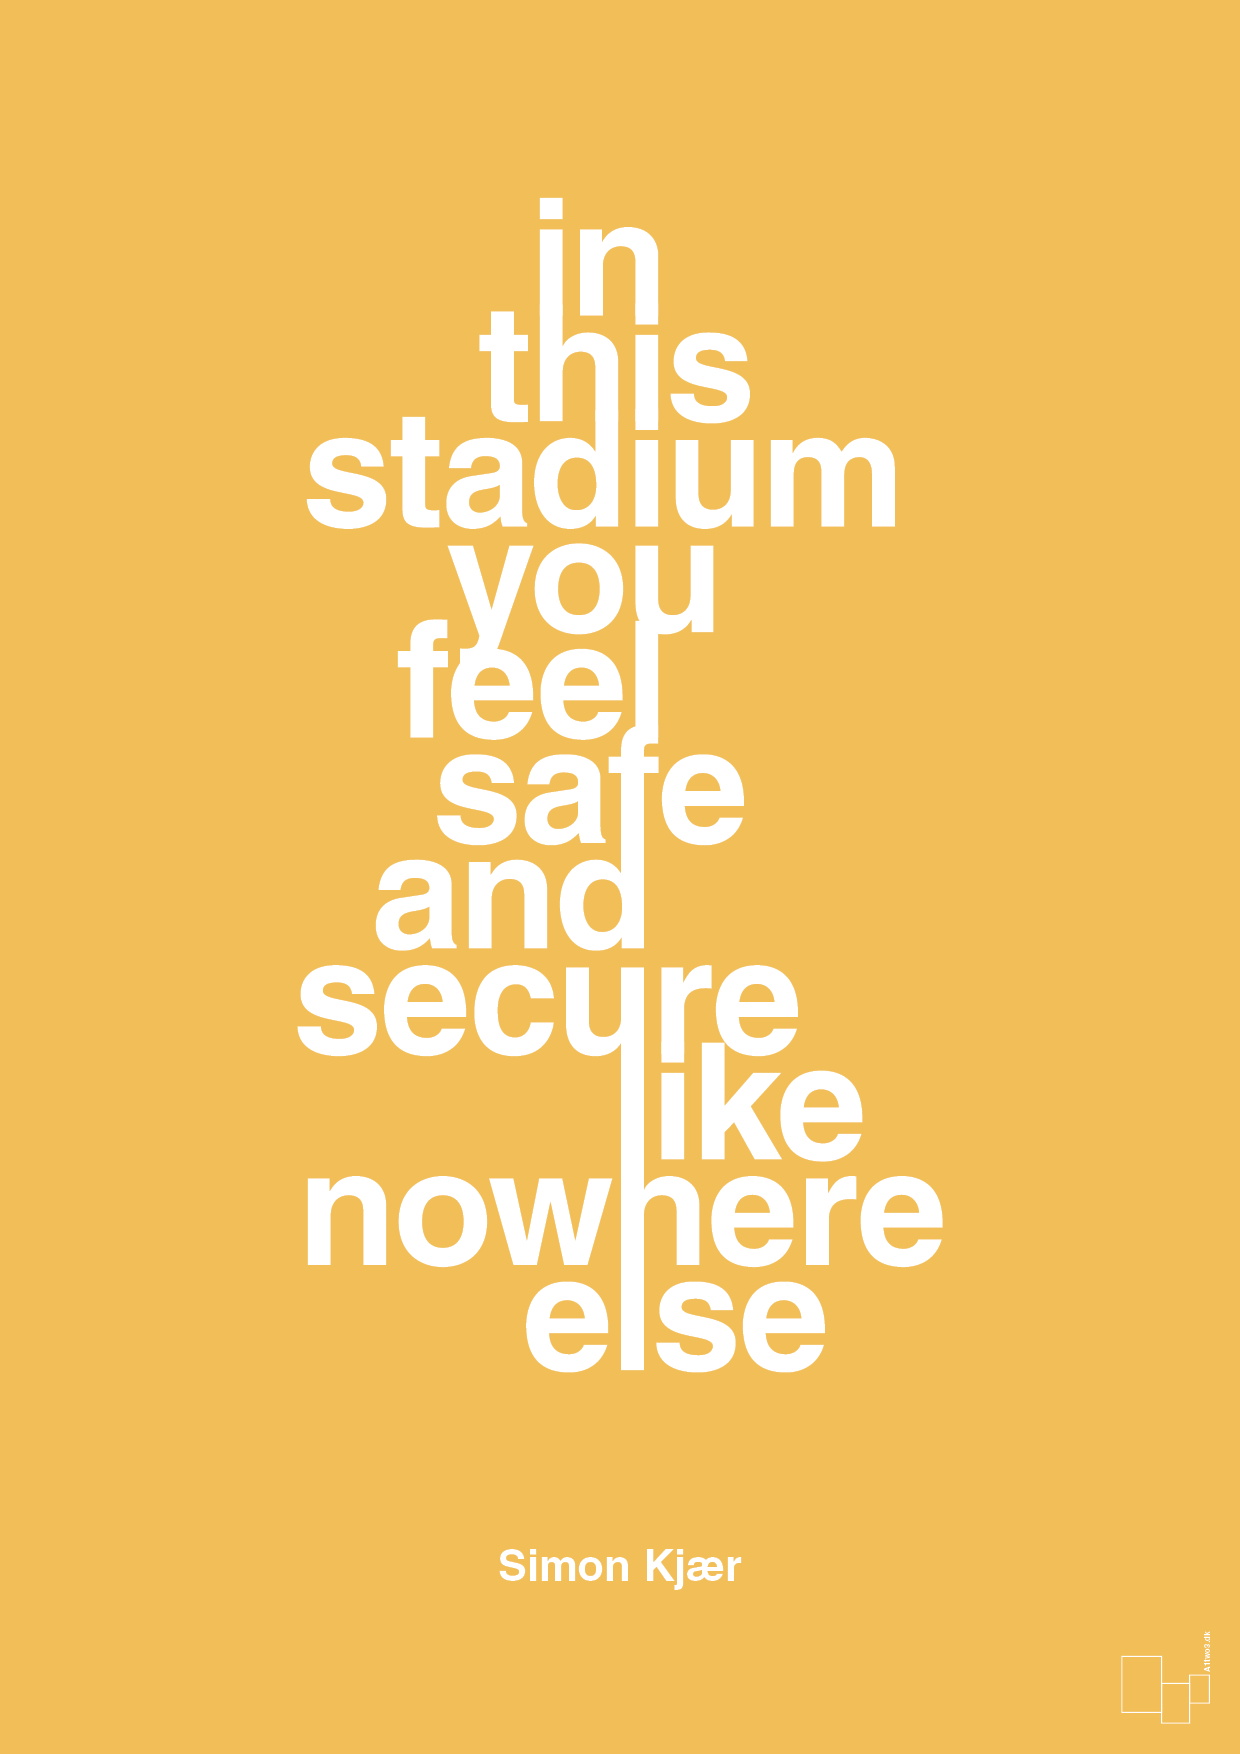 in this stadium you feel safe and secure like nowhere else - Plakat med Citater i Honeycomb